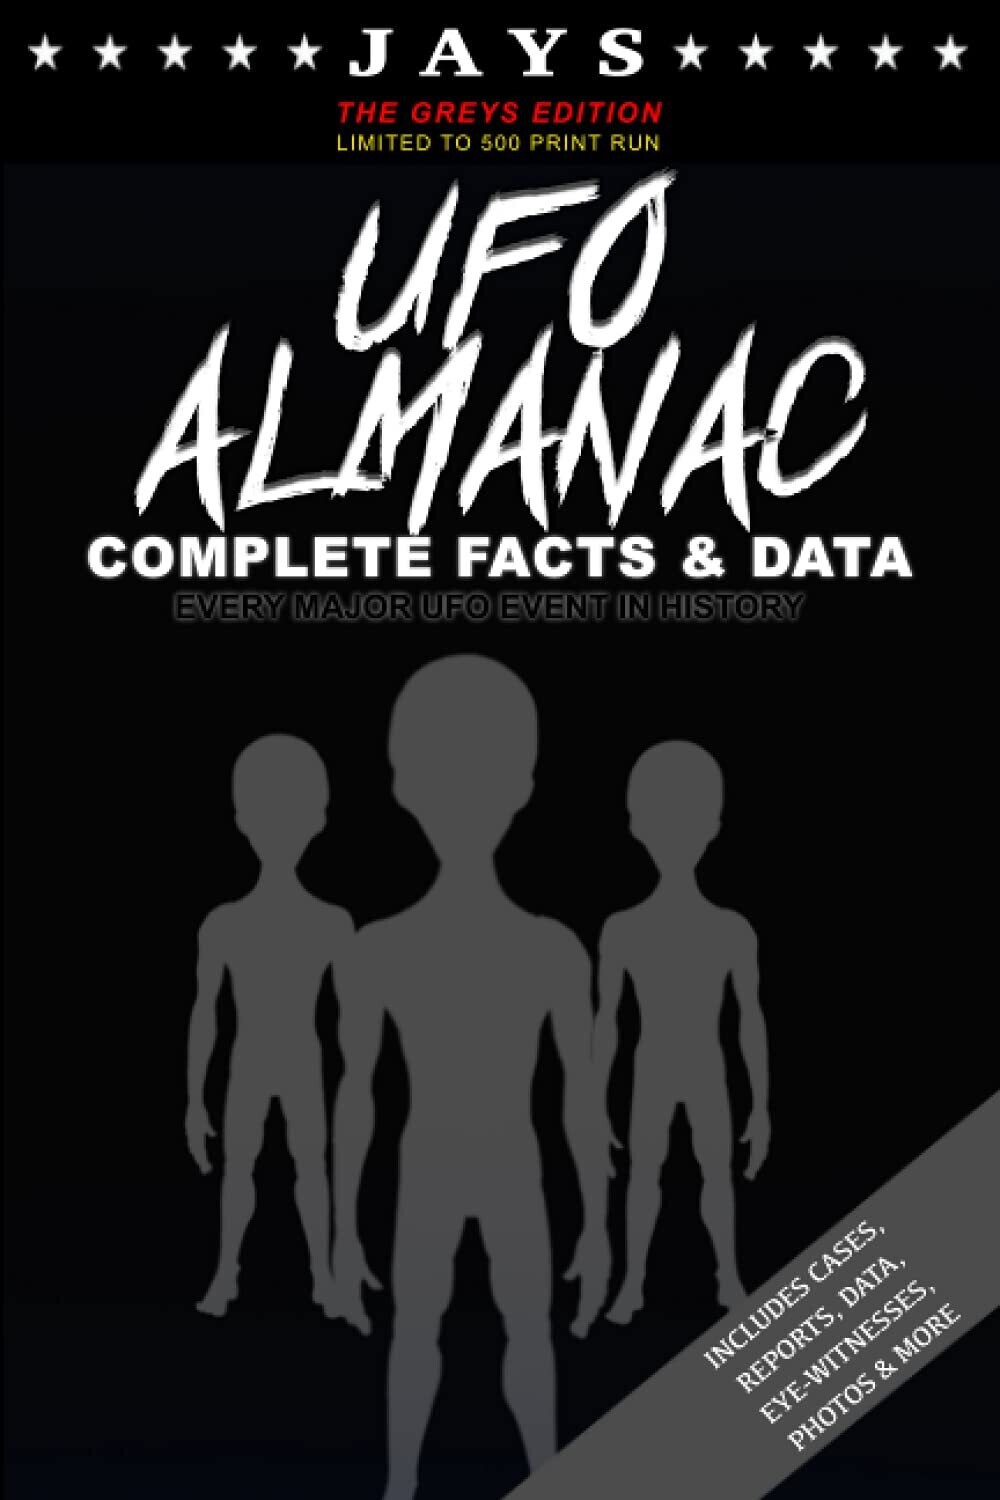 Jays UFO Almanac: Complete Facts & Data - Every Major UFO Case in History Book [#9 GREYS EDITION - LIMITED TO 500 PRINT RUN] [Paperback]